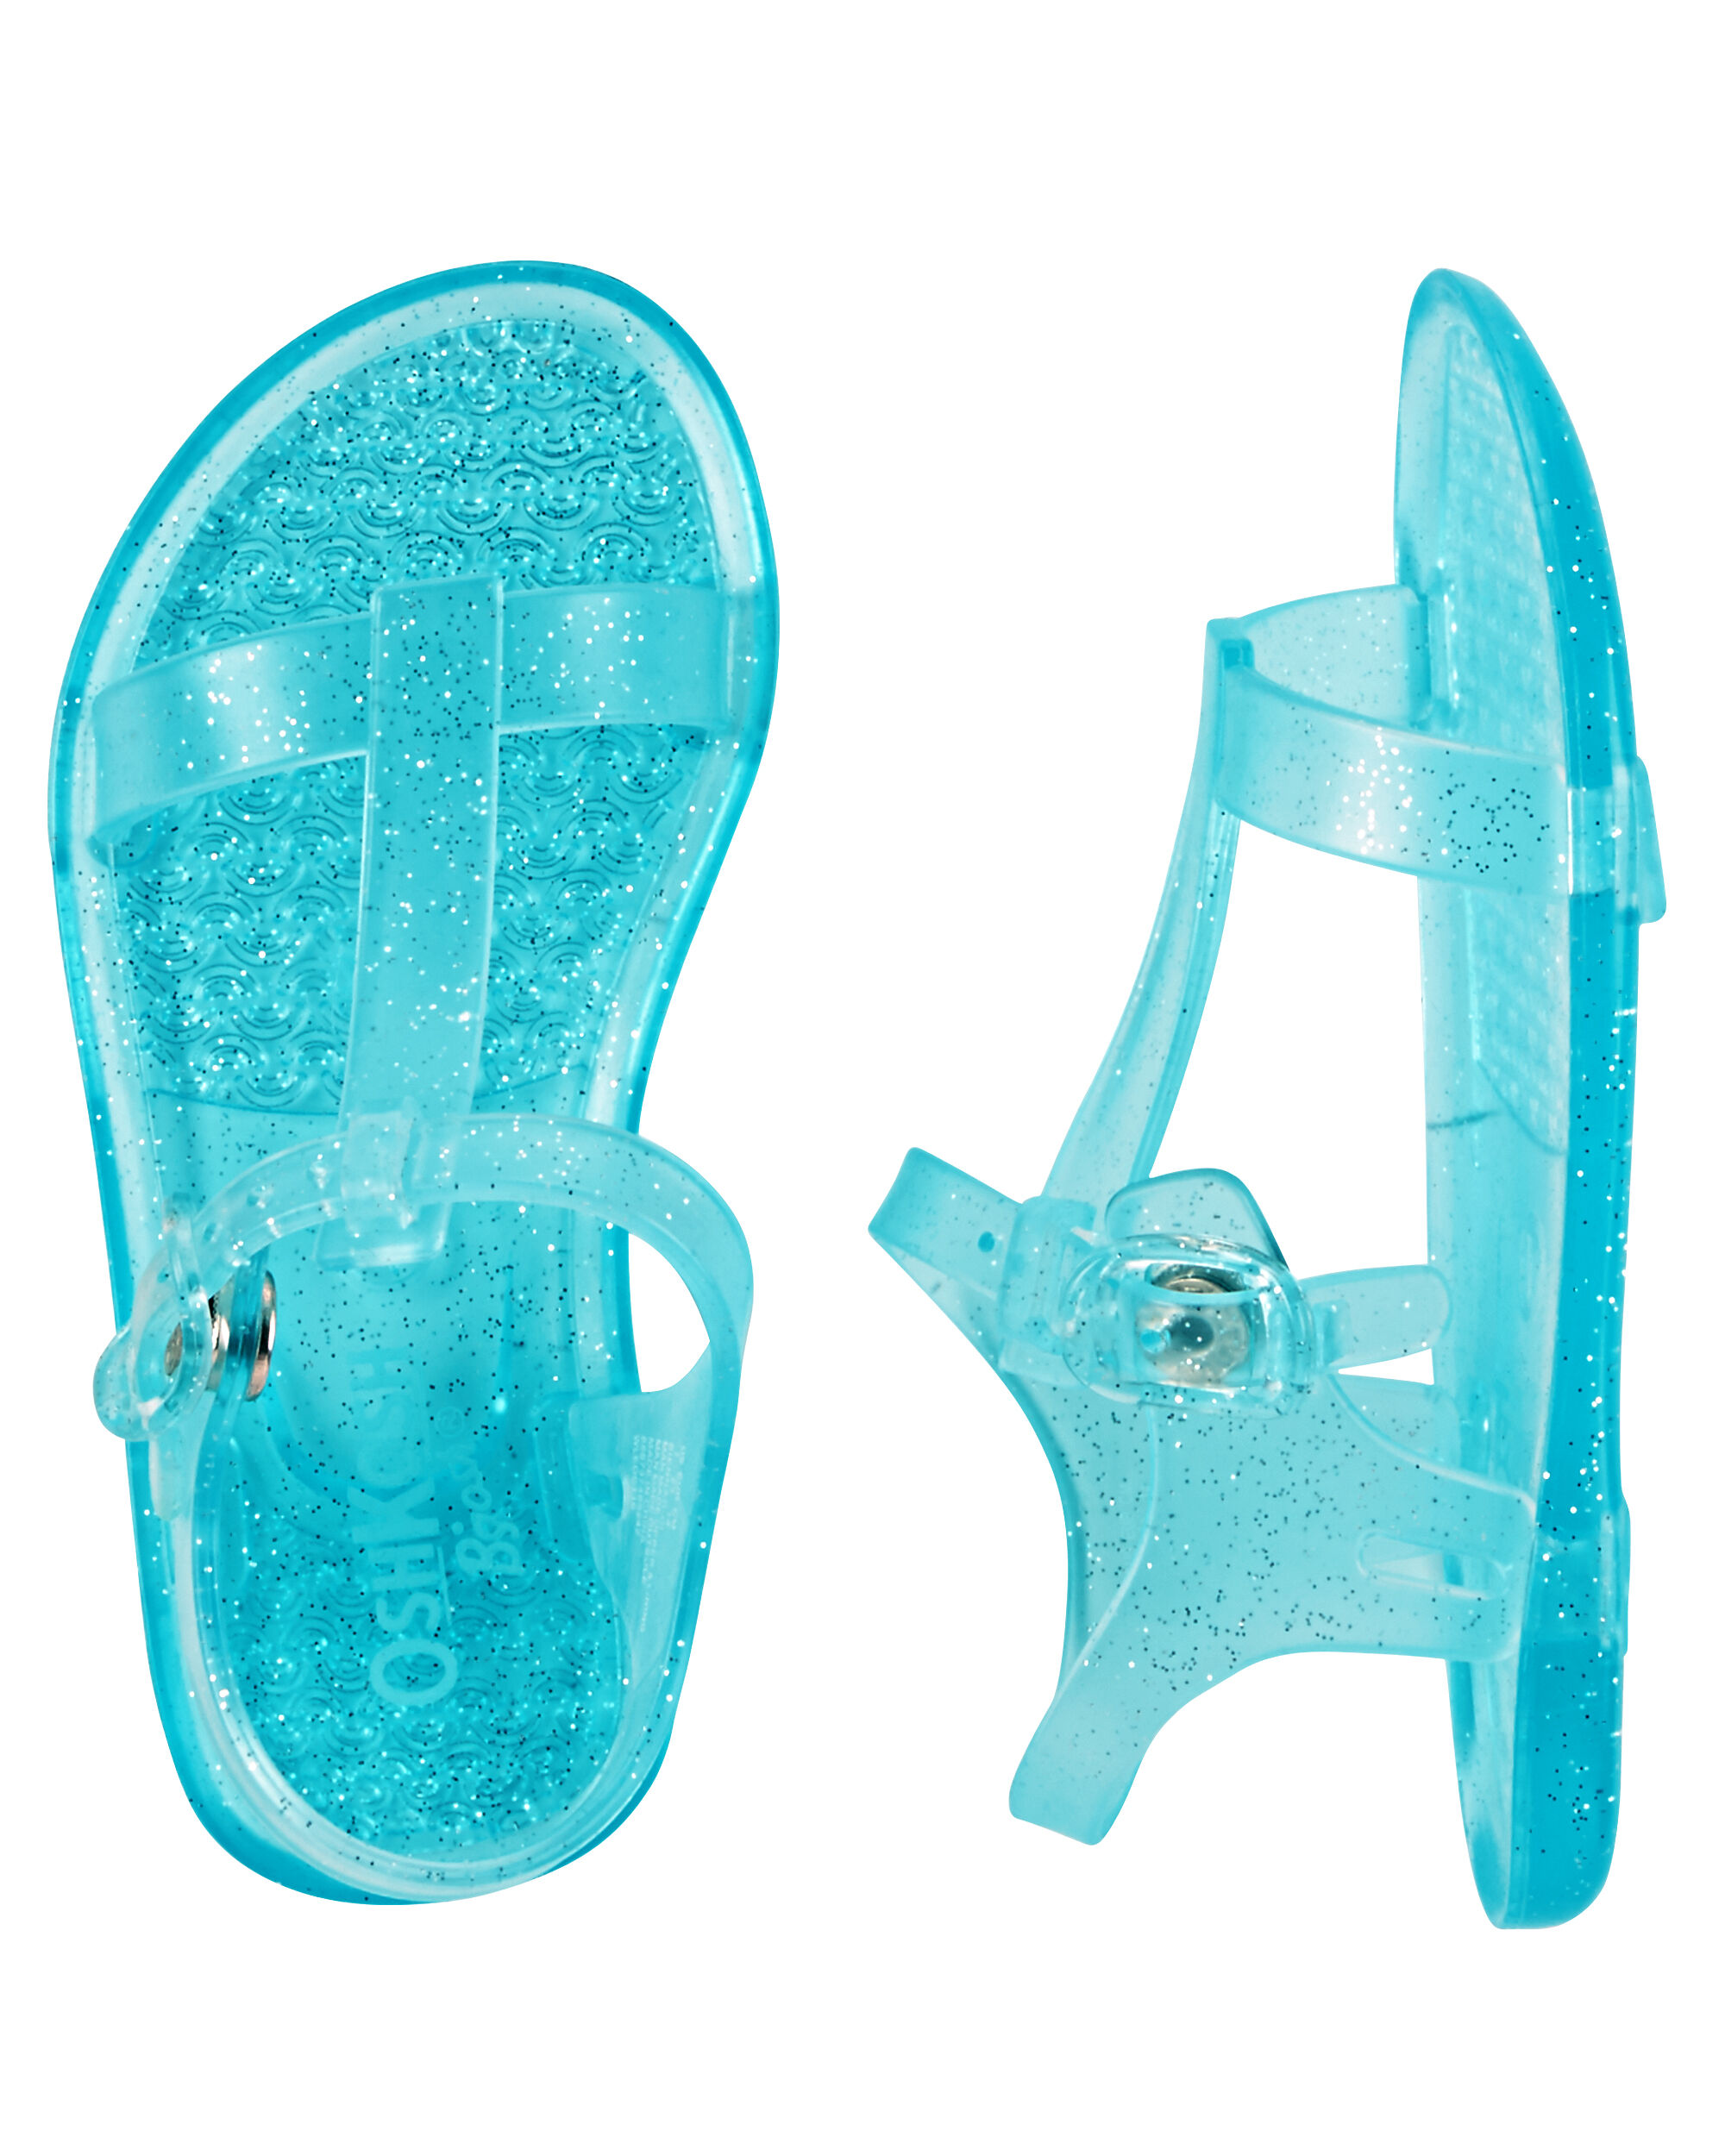 sparkly jelly sandals